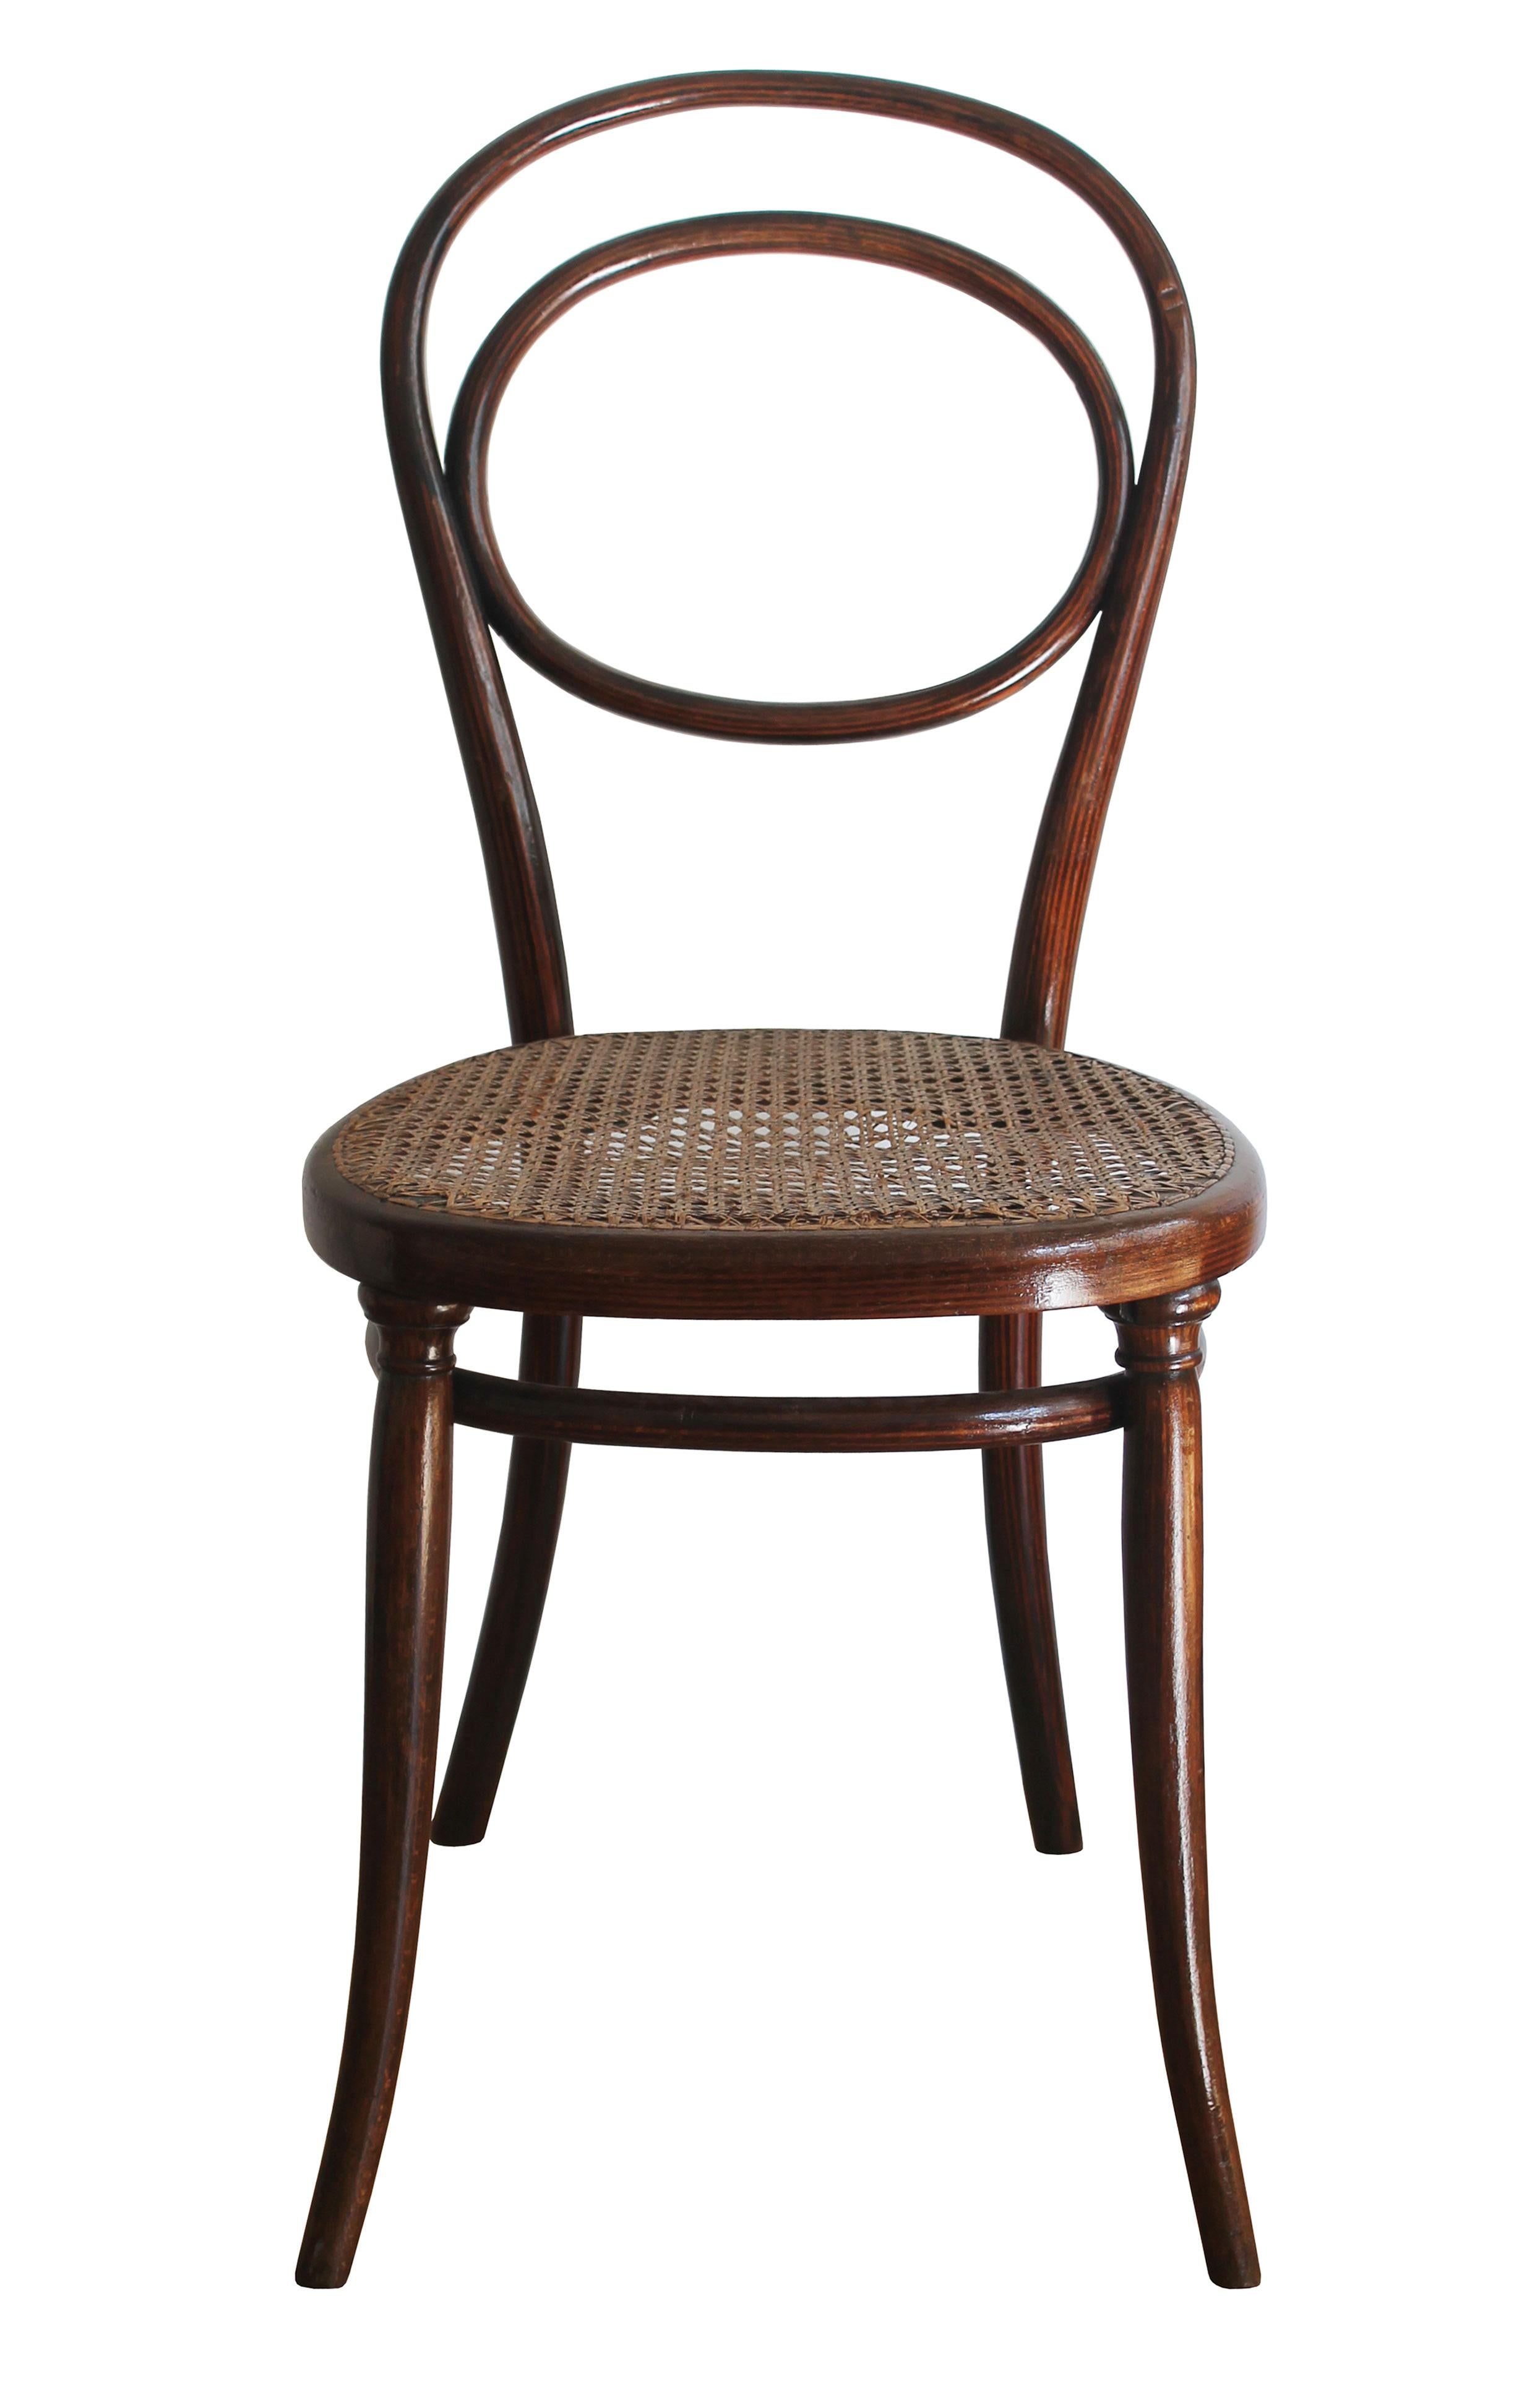 A rare bentwood dining chair with beautiful patterned wood and weaved rattan seat. This piece was designed and made by Gebrüder Thonet around 1850. We can find the chair in the old Thonet furniture catalogue as ‘Model Number 10’. This particular